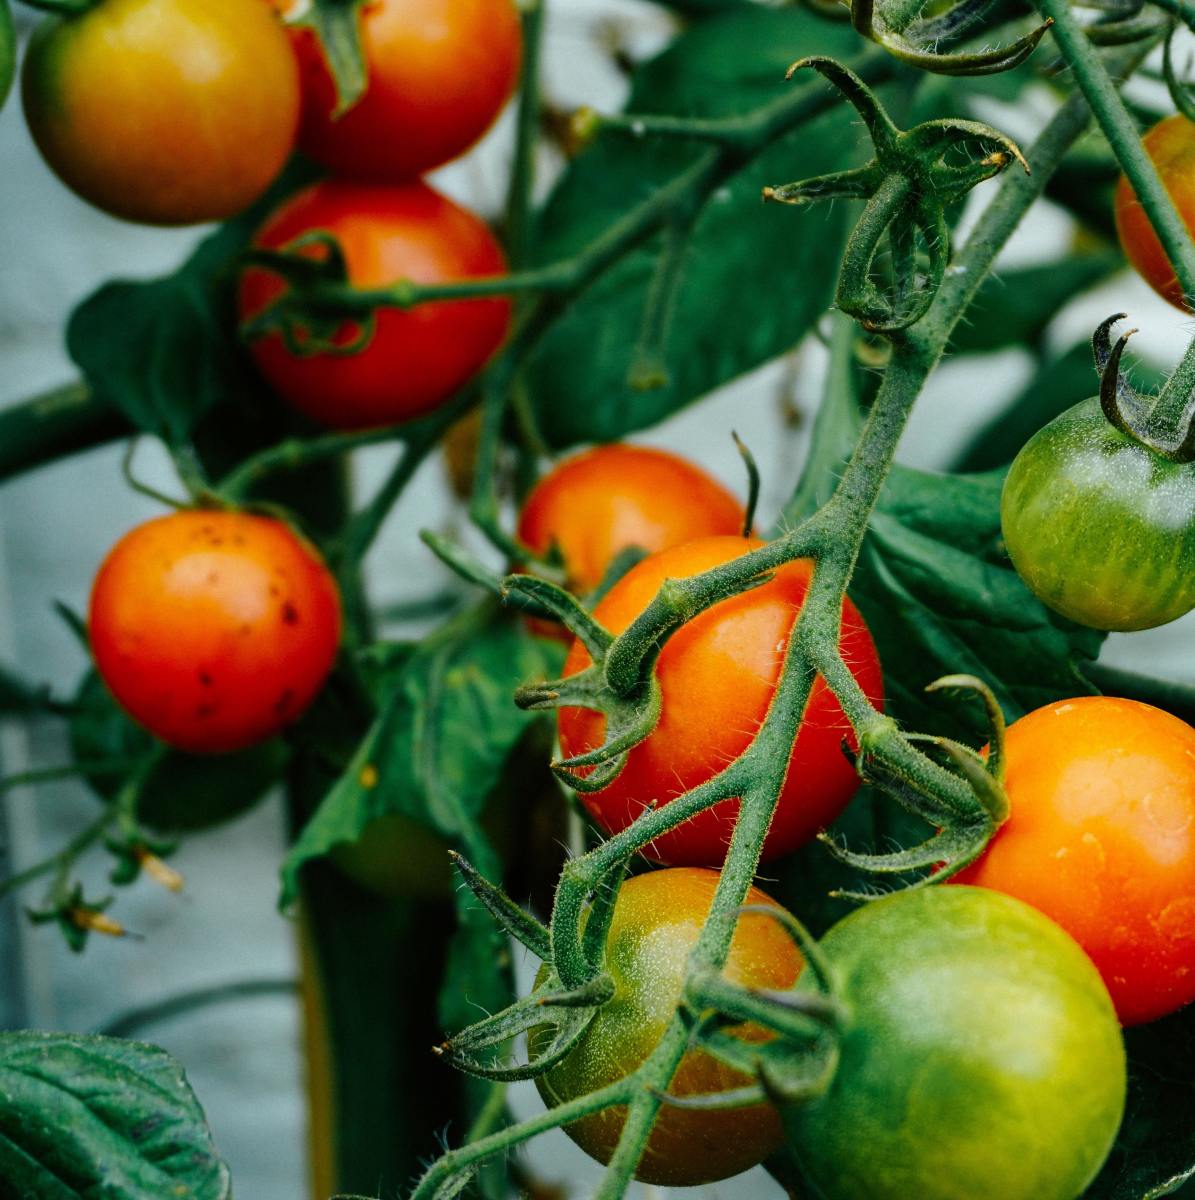 How to Get the Highest Yield and Best Flavor From Tomatoes